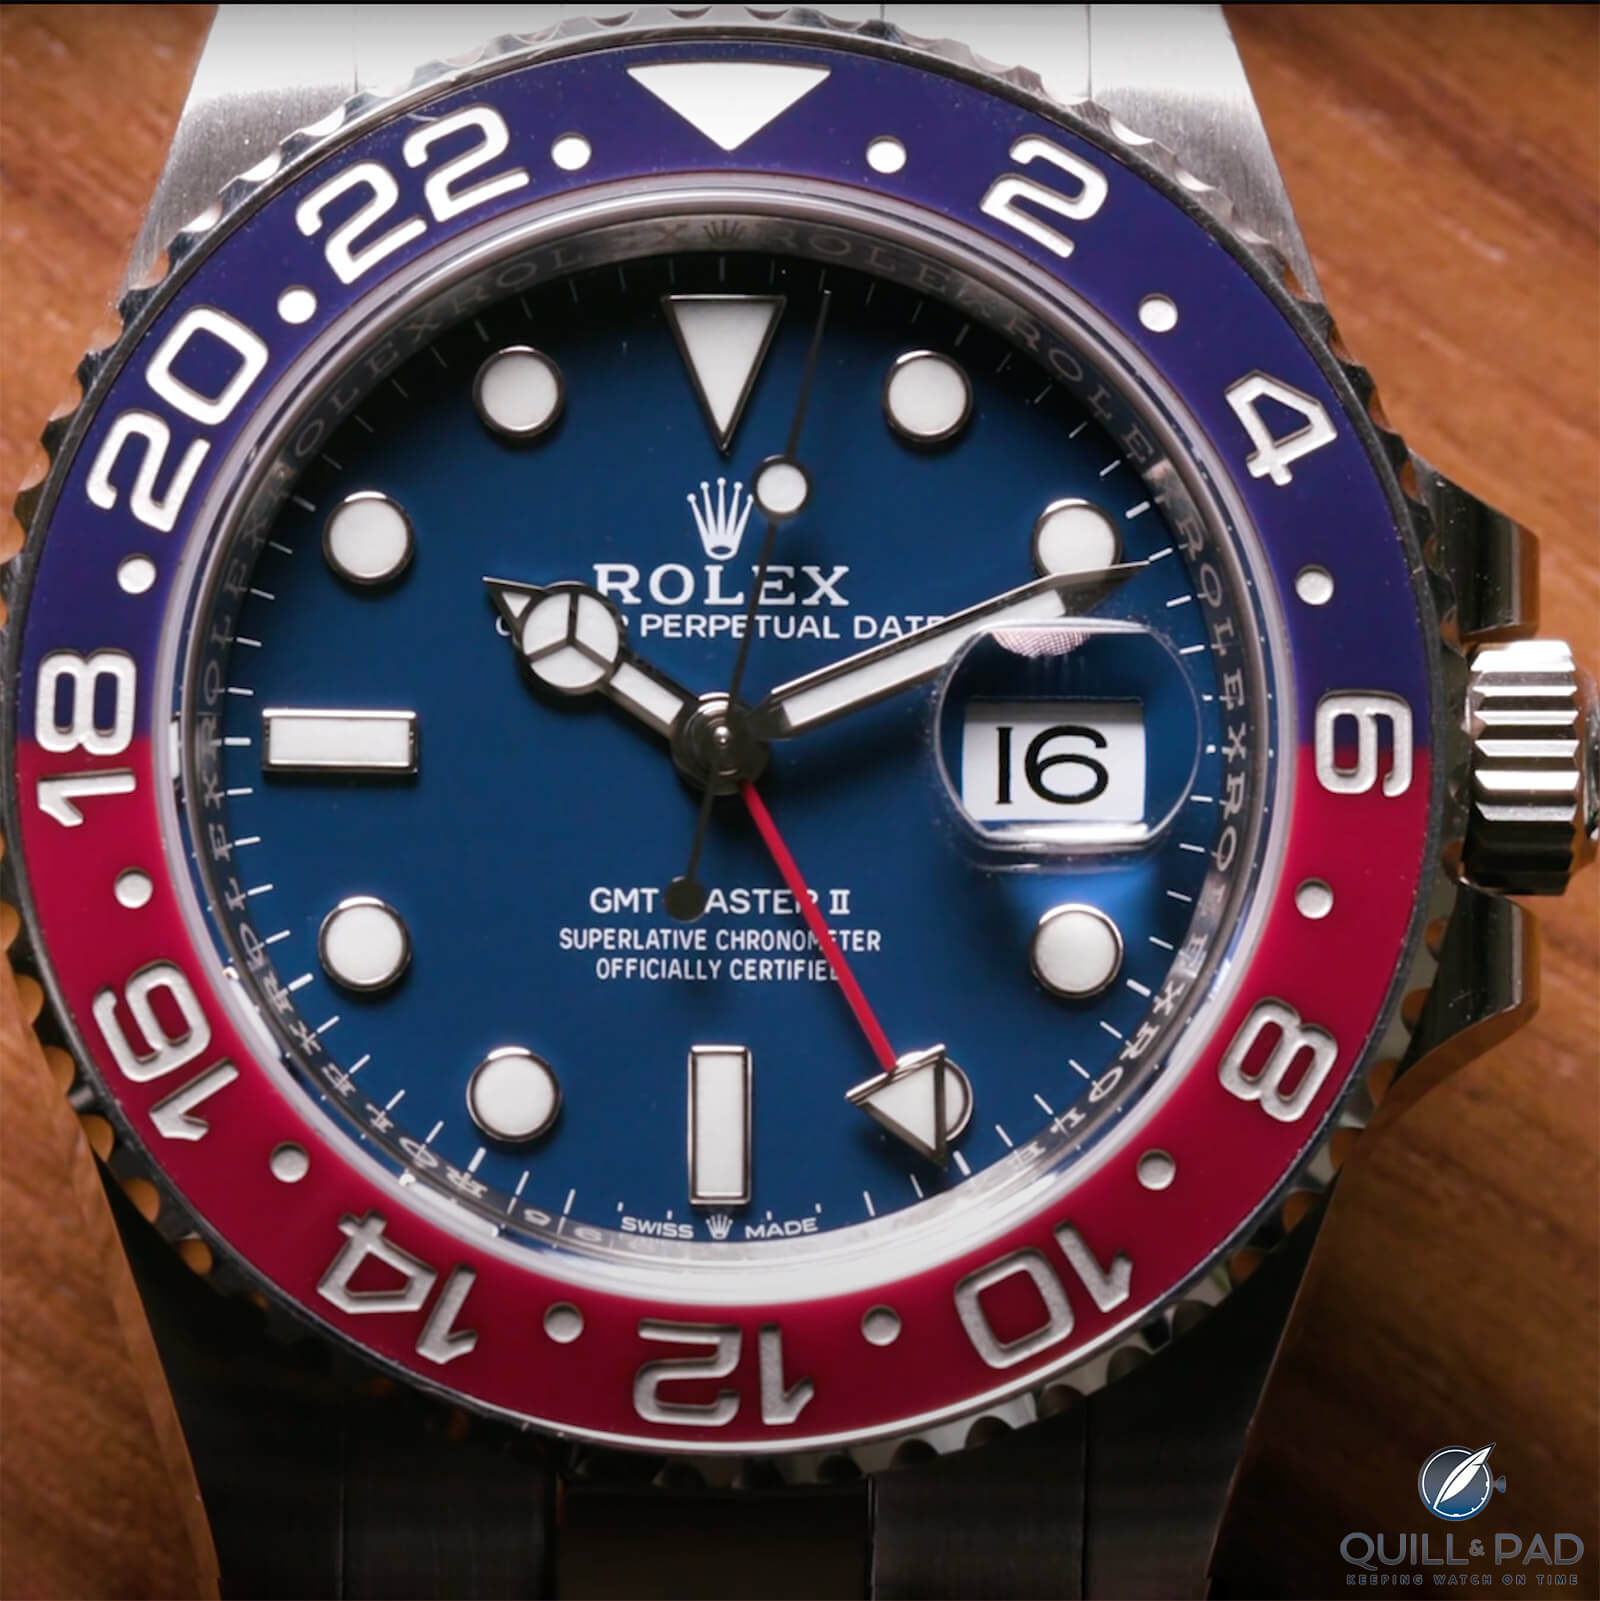 Rolex 2022? which will be discontinued Our Rolex